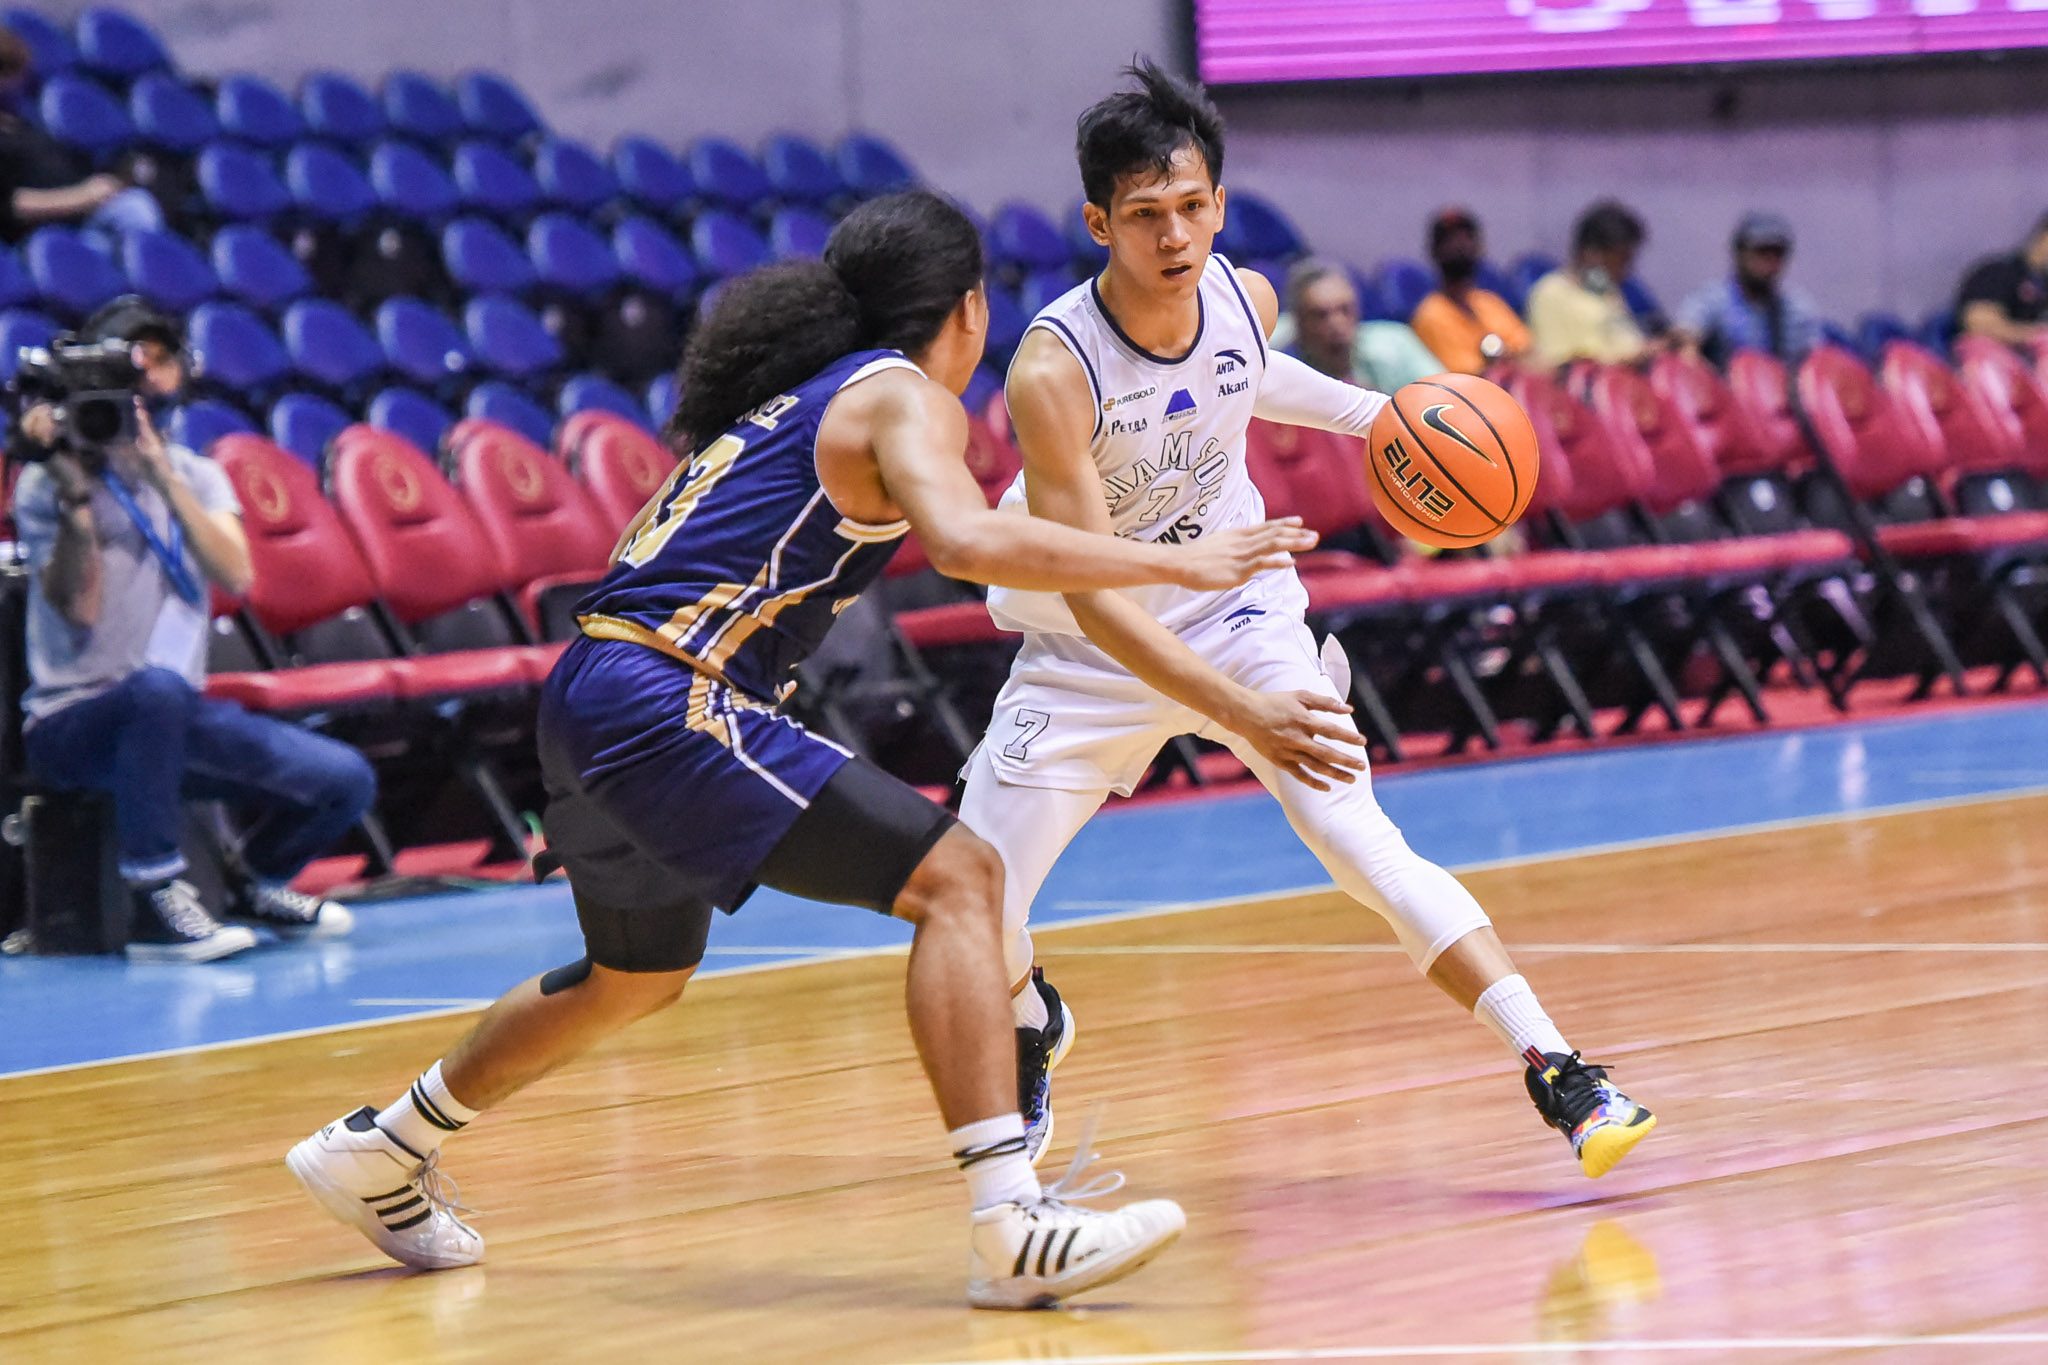 Lastimosa sinks game-winner as Adamson escapes NU to stay in Final Four race